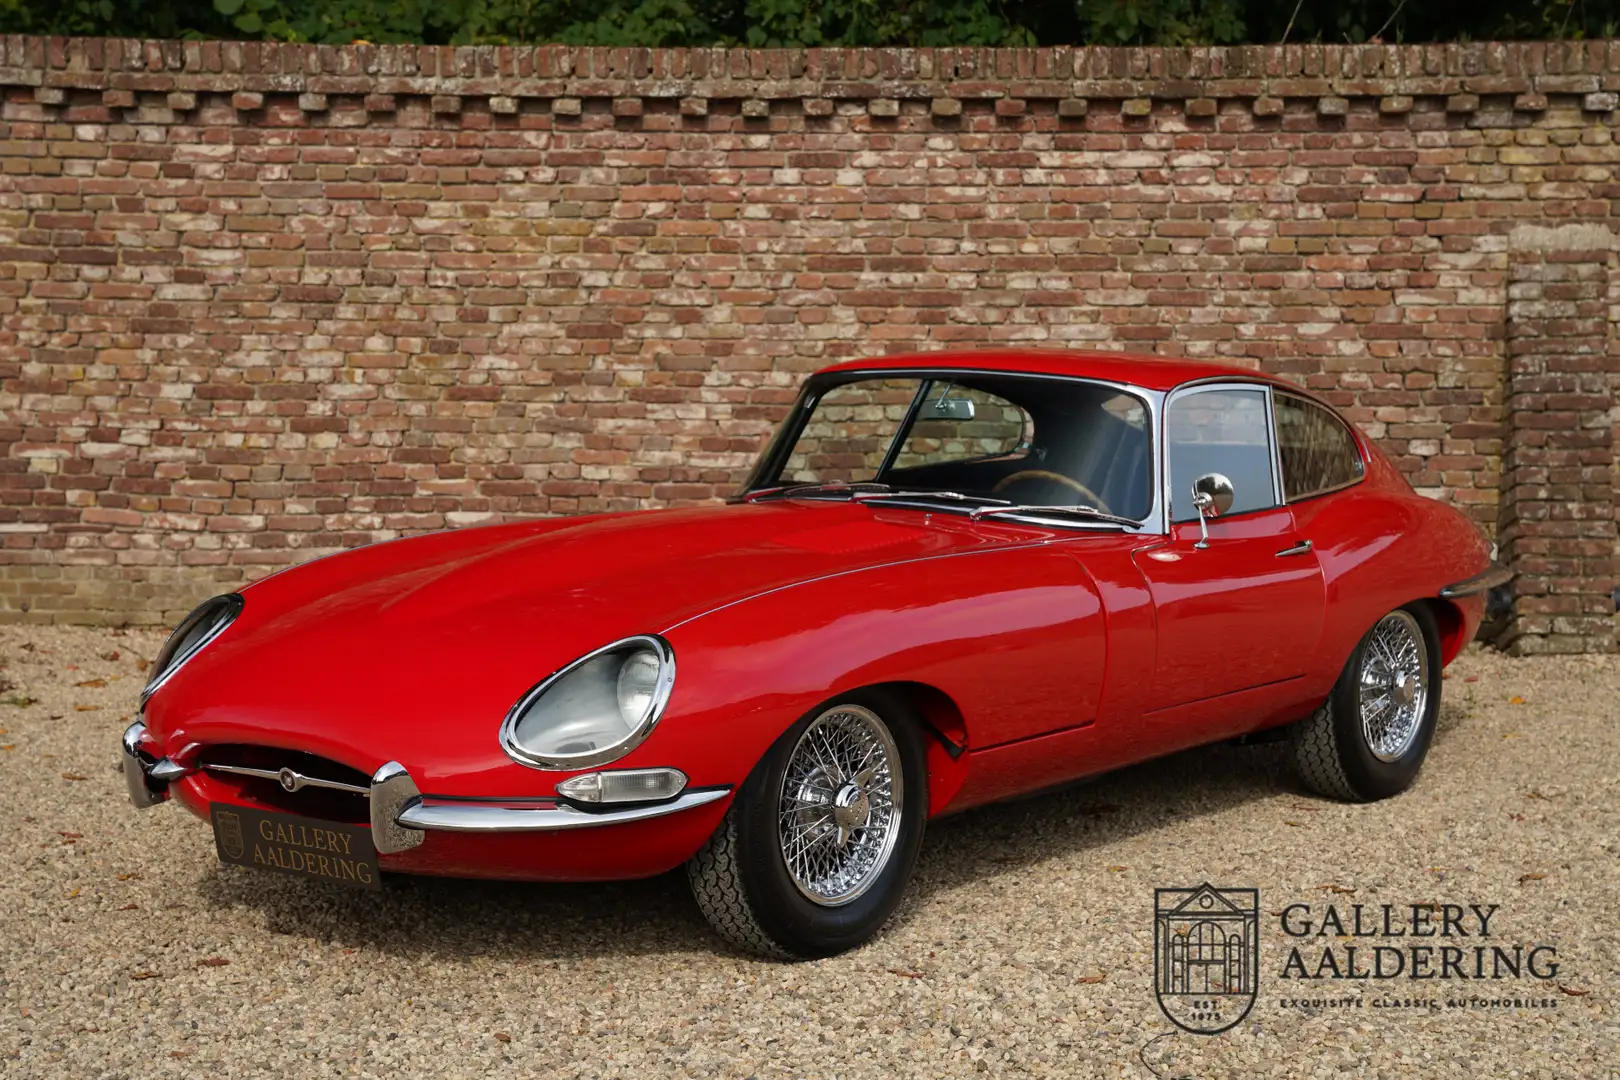 Jaguar E-Type XKE 3.8 series 1 FHC Matching numbers, restored an Rouge - 1